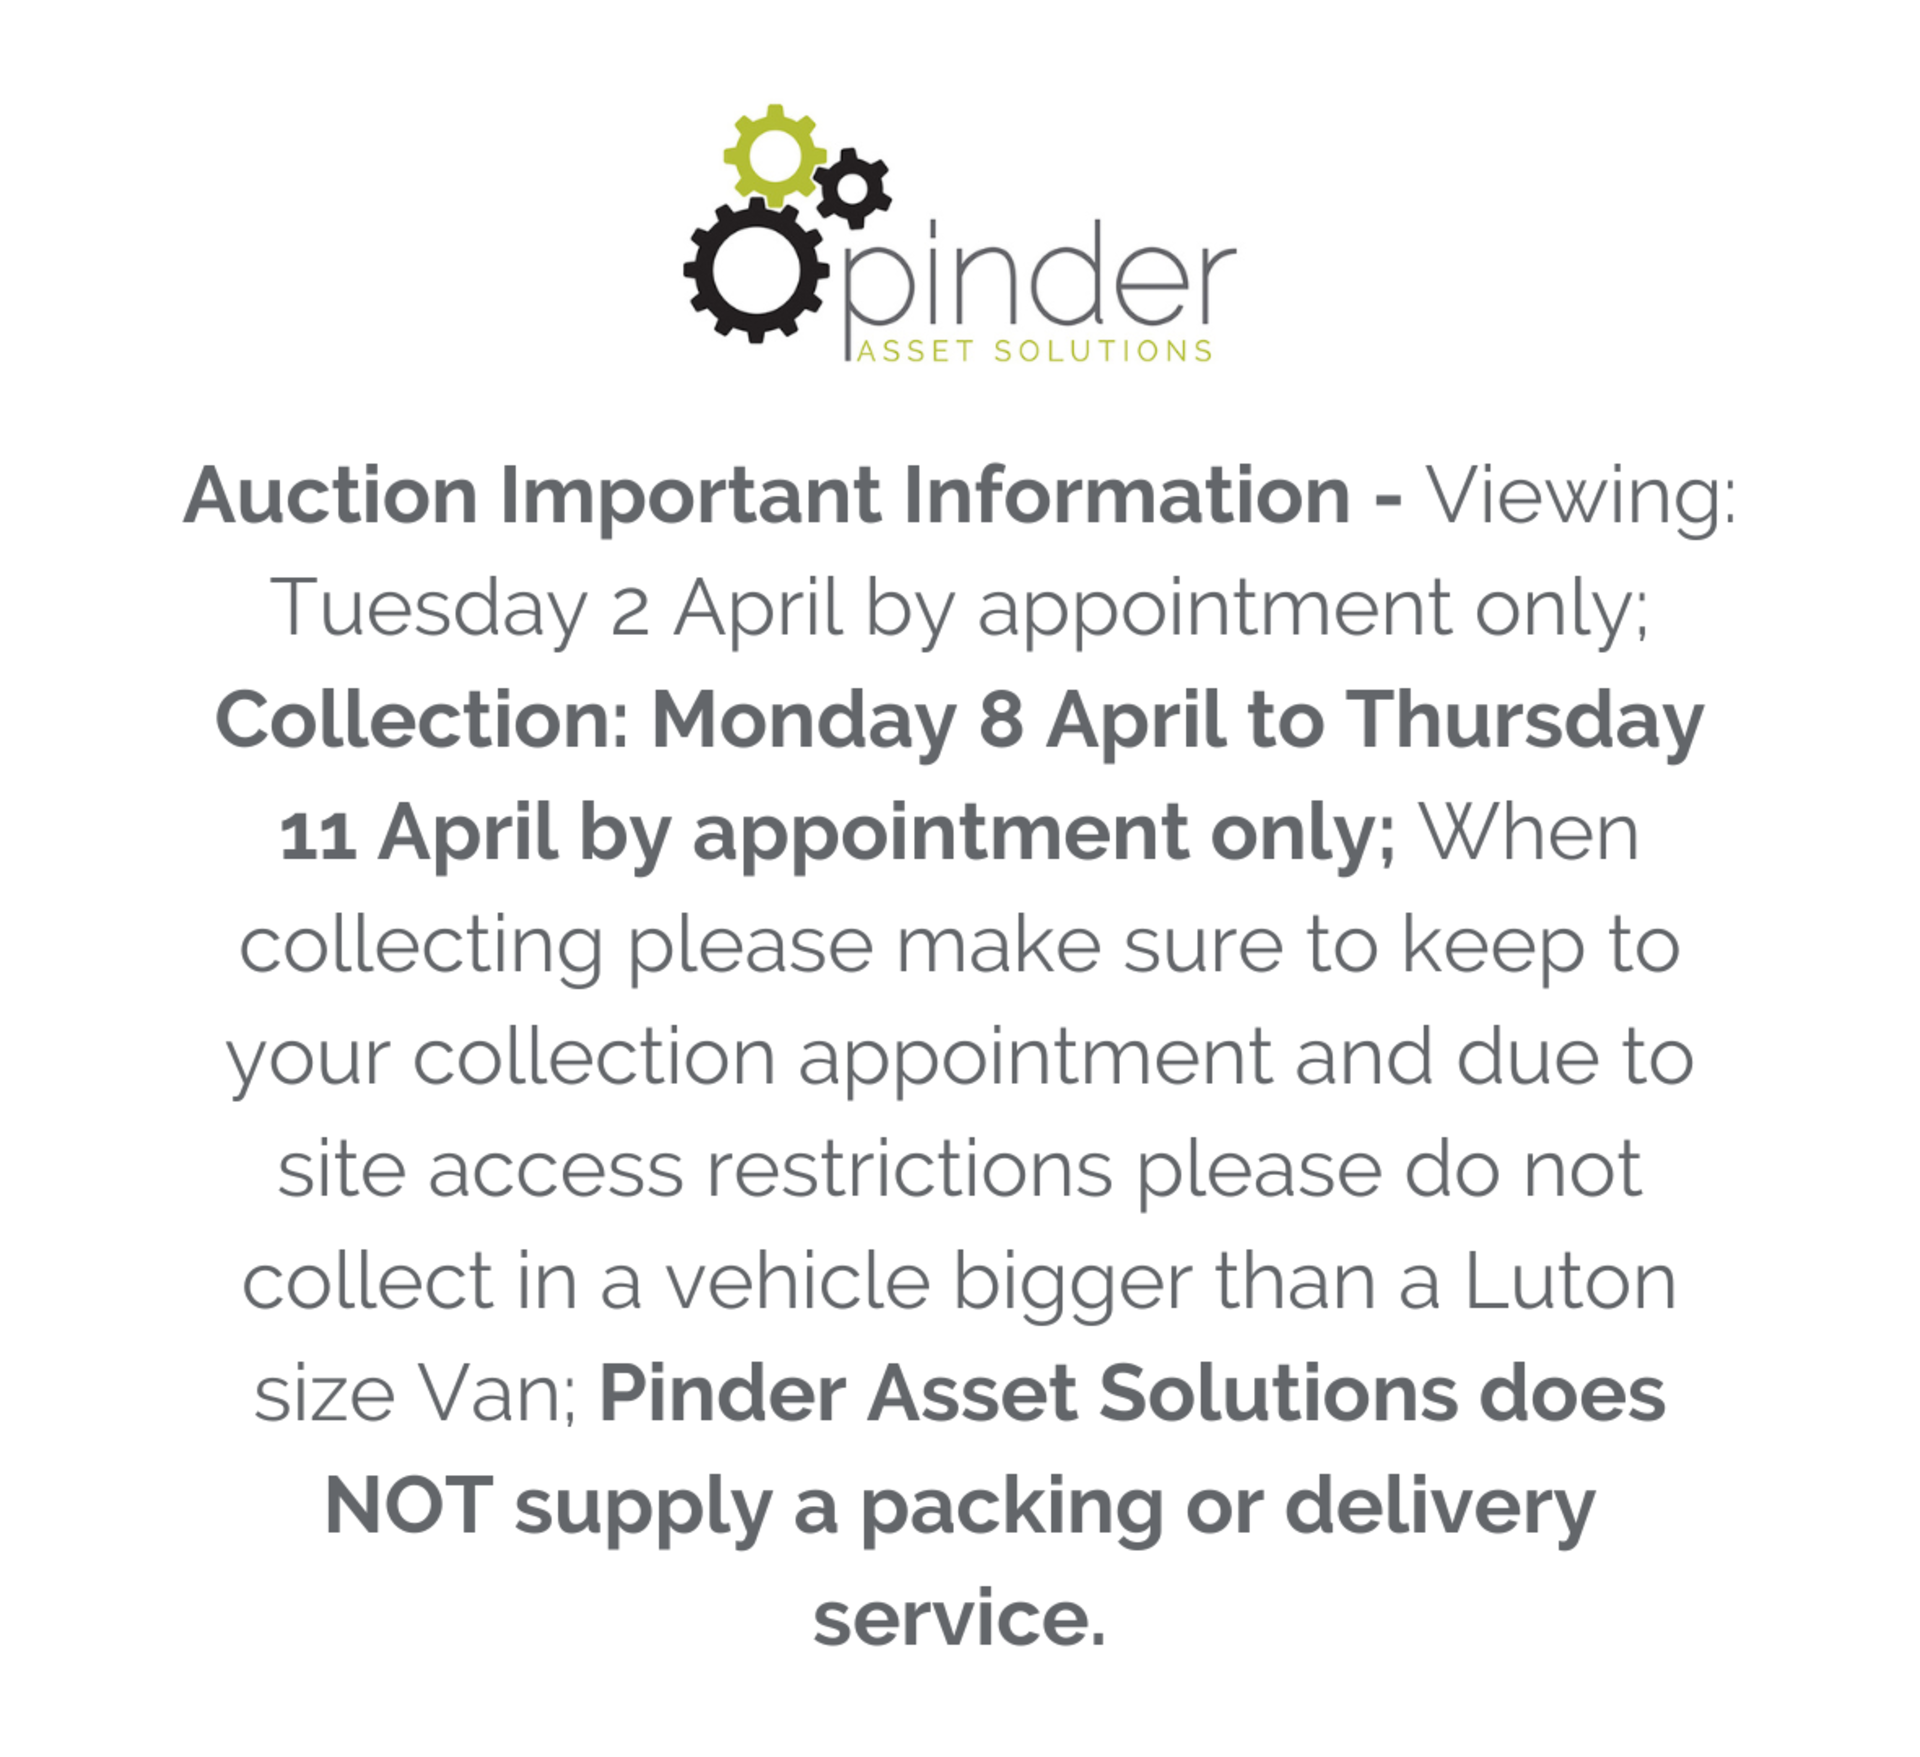 Auction Important Information - Viewing: Tuesday 2 April by appointment only; Collection: Monday 8